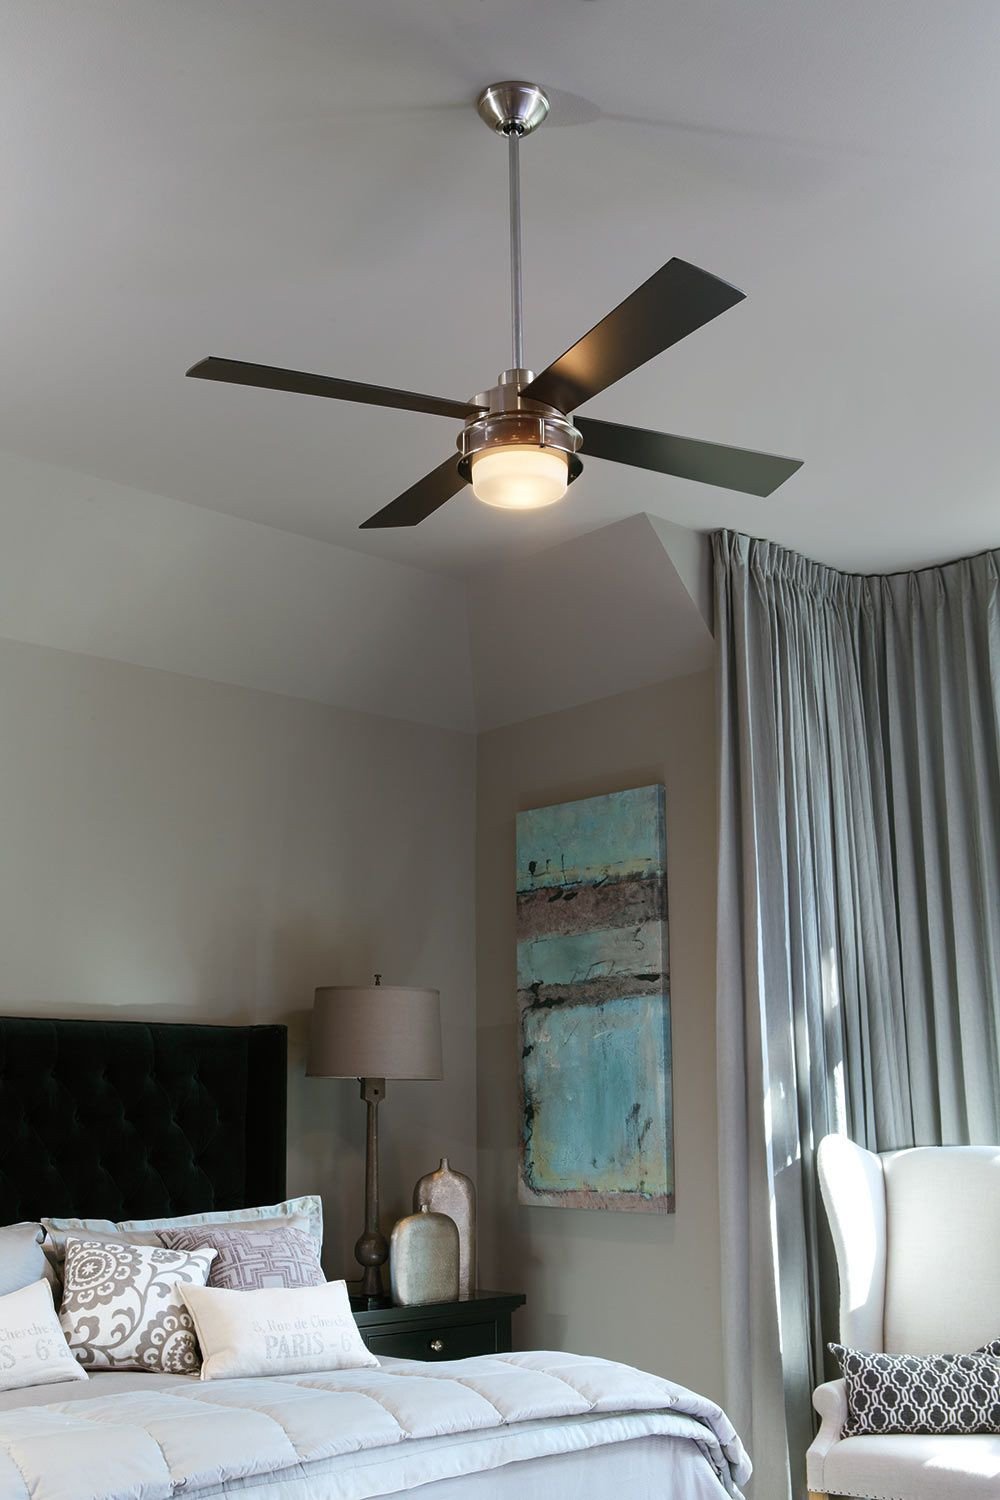 Modern Bedroom Ceiling Fan Unique with A touch Of Industrial Design the Ellington Urban